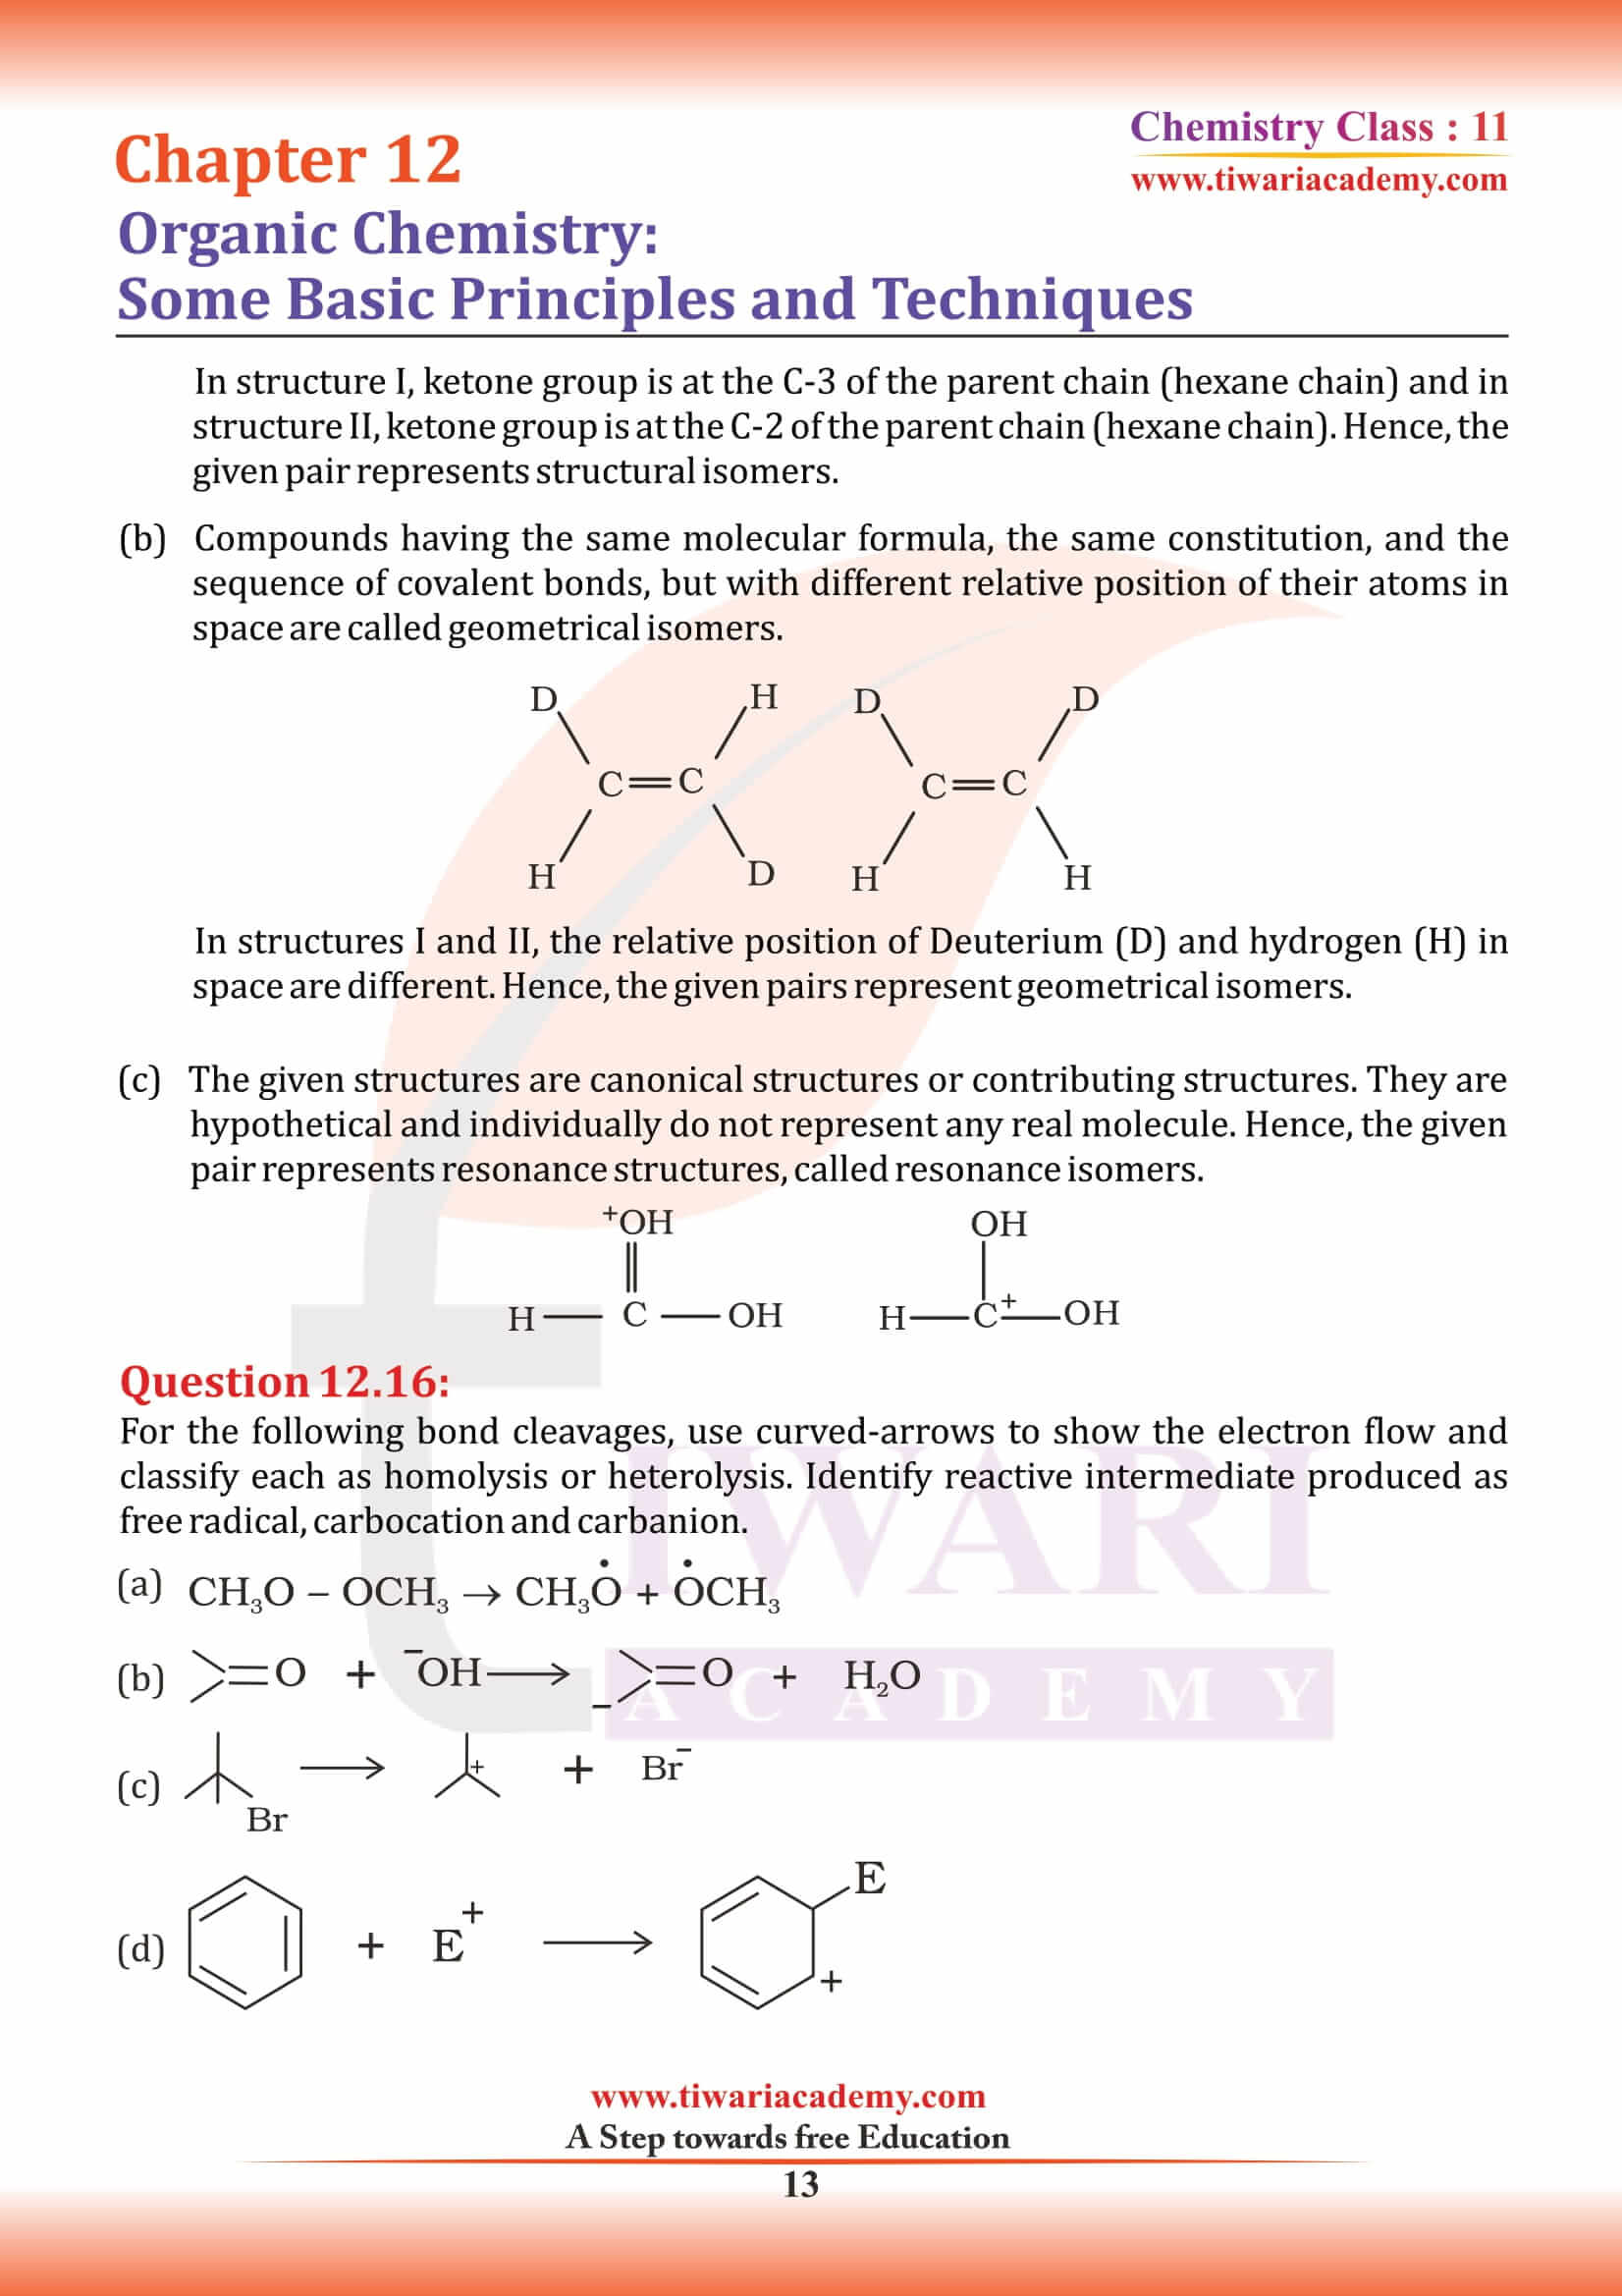 Class 11 Chemistry Chapter 12 answer guide